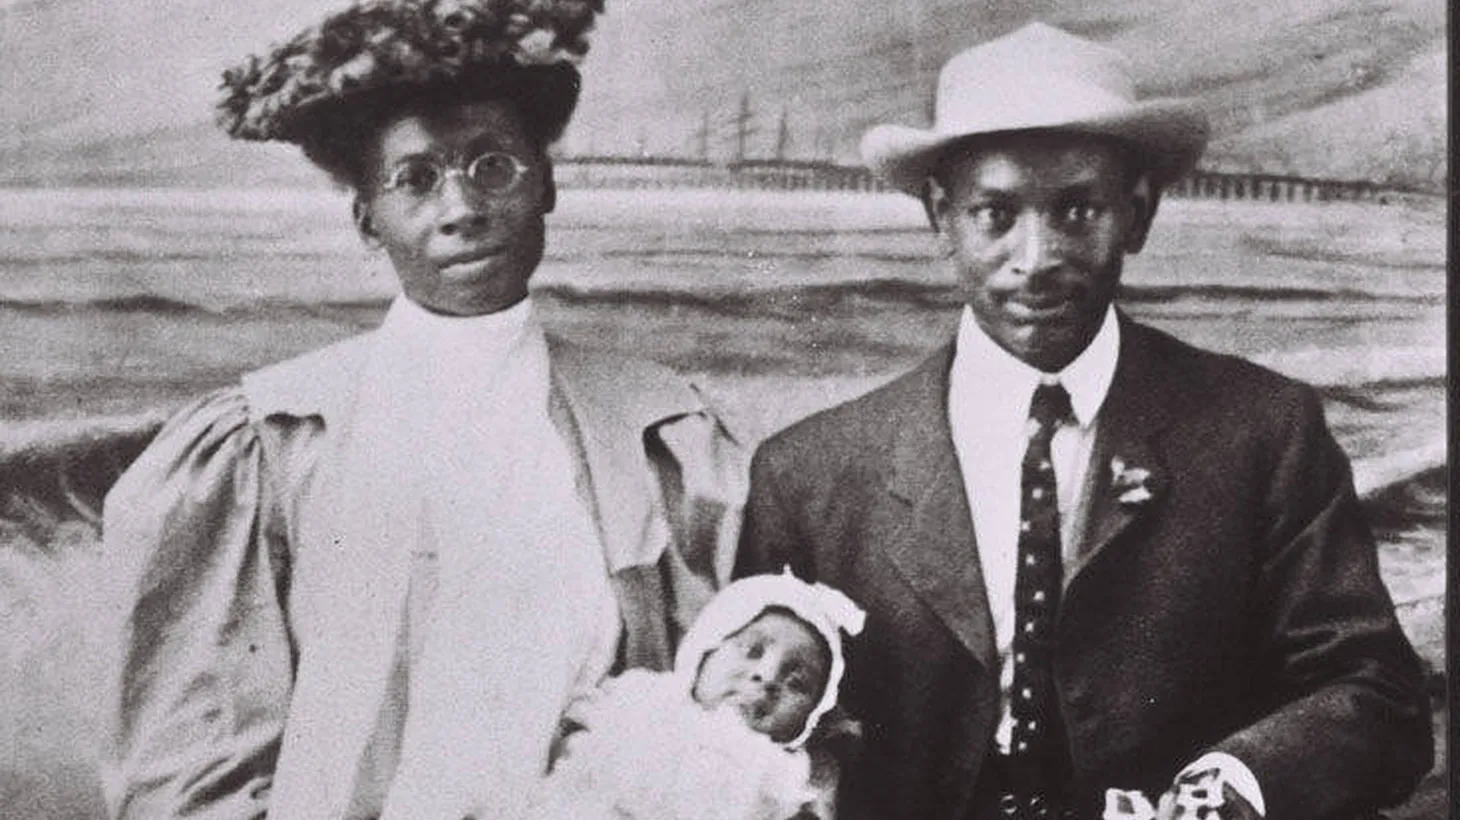 Selena McDonald Brunson and Charles E.A. Brunson hold baby Donald A. Brunson, the first African American child born in Santa Monica, in a 1907 photograph taken on the Santa Monica Pier. Members of the Brunson family later lost property in Santa Monica when the 10 freeway was built.